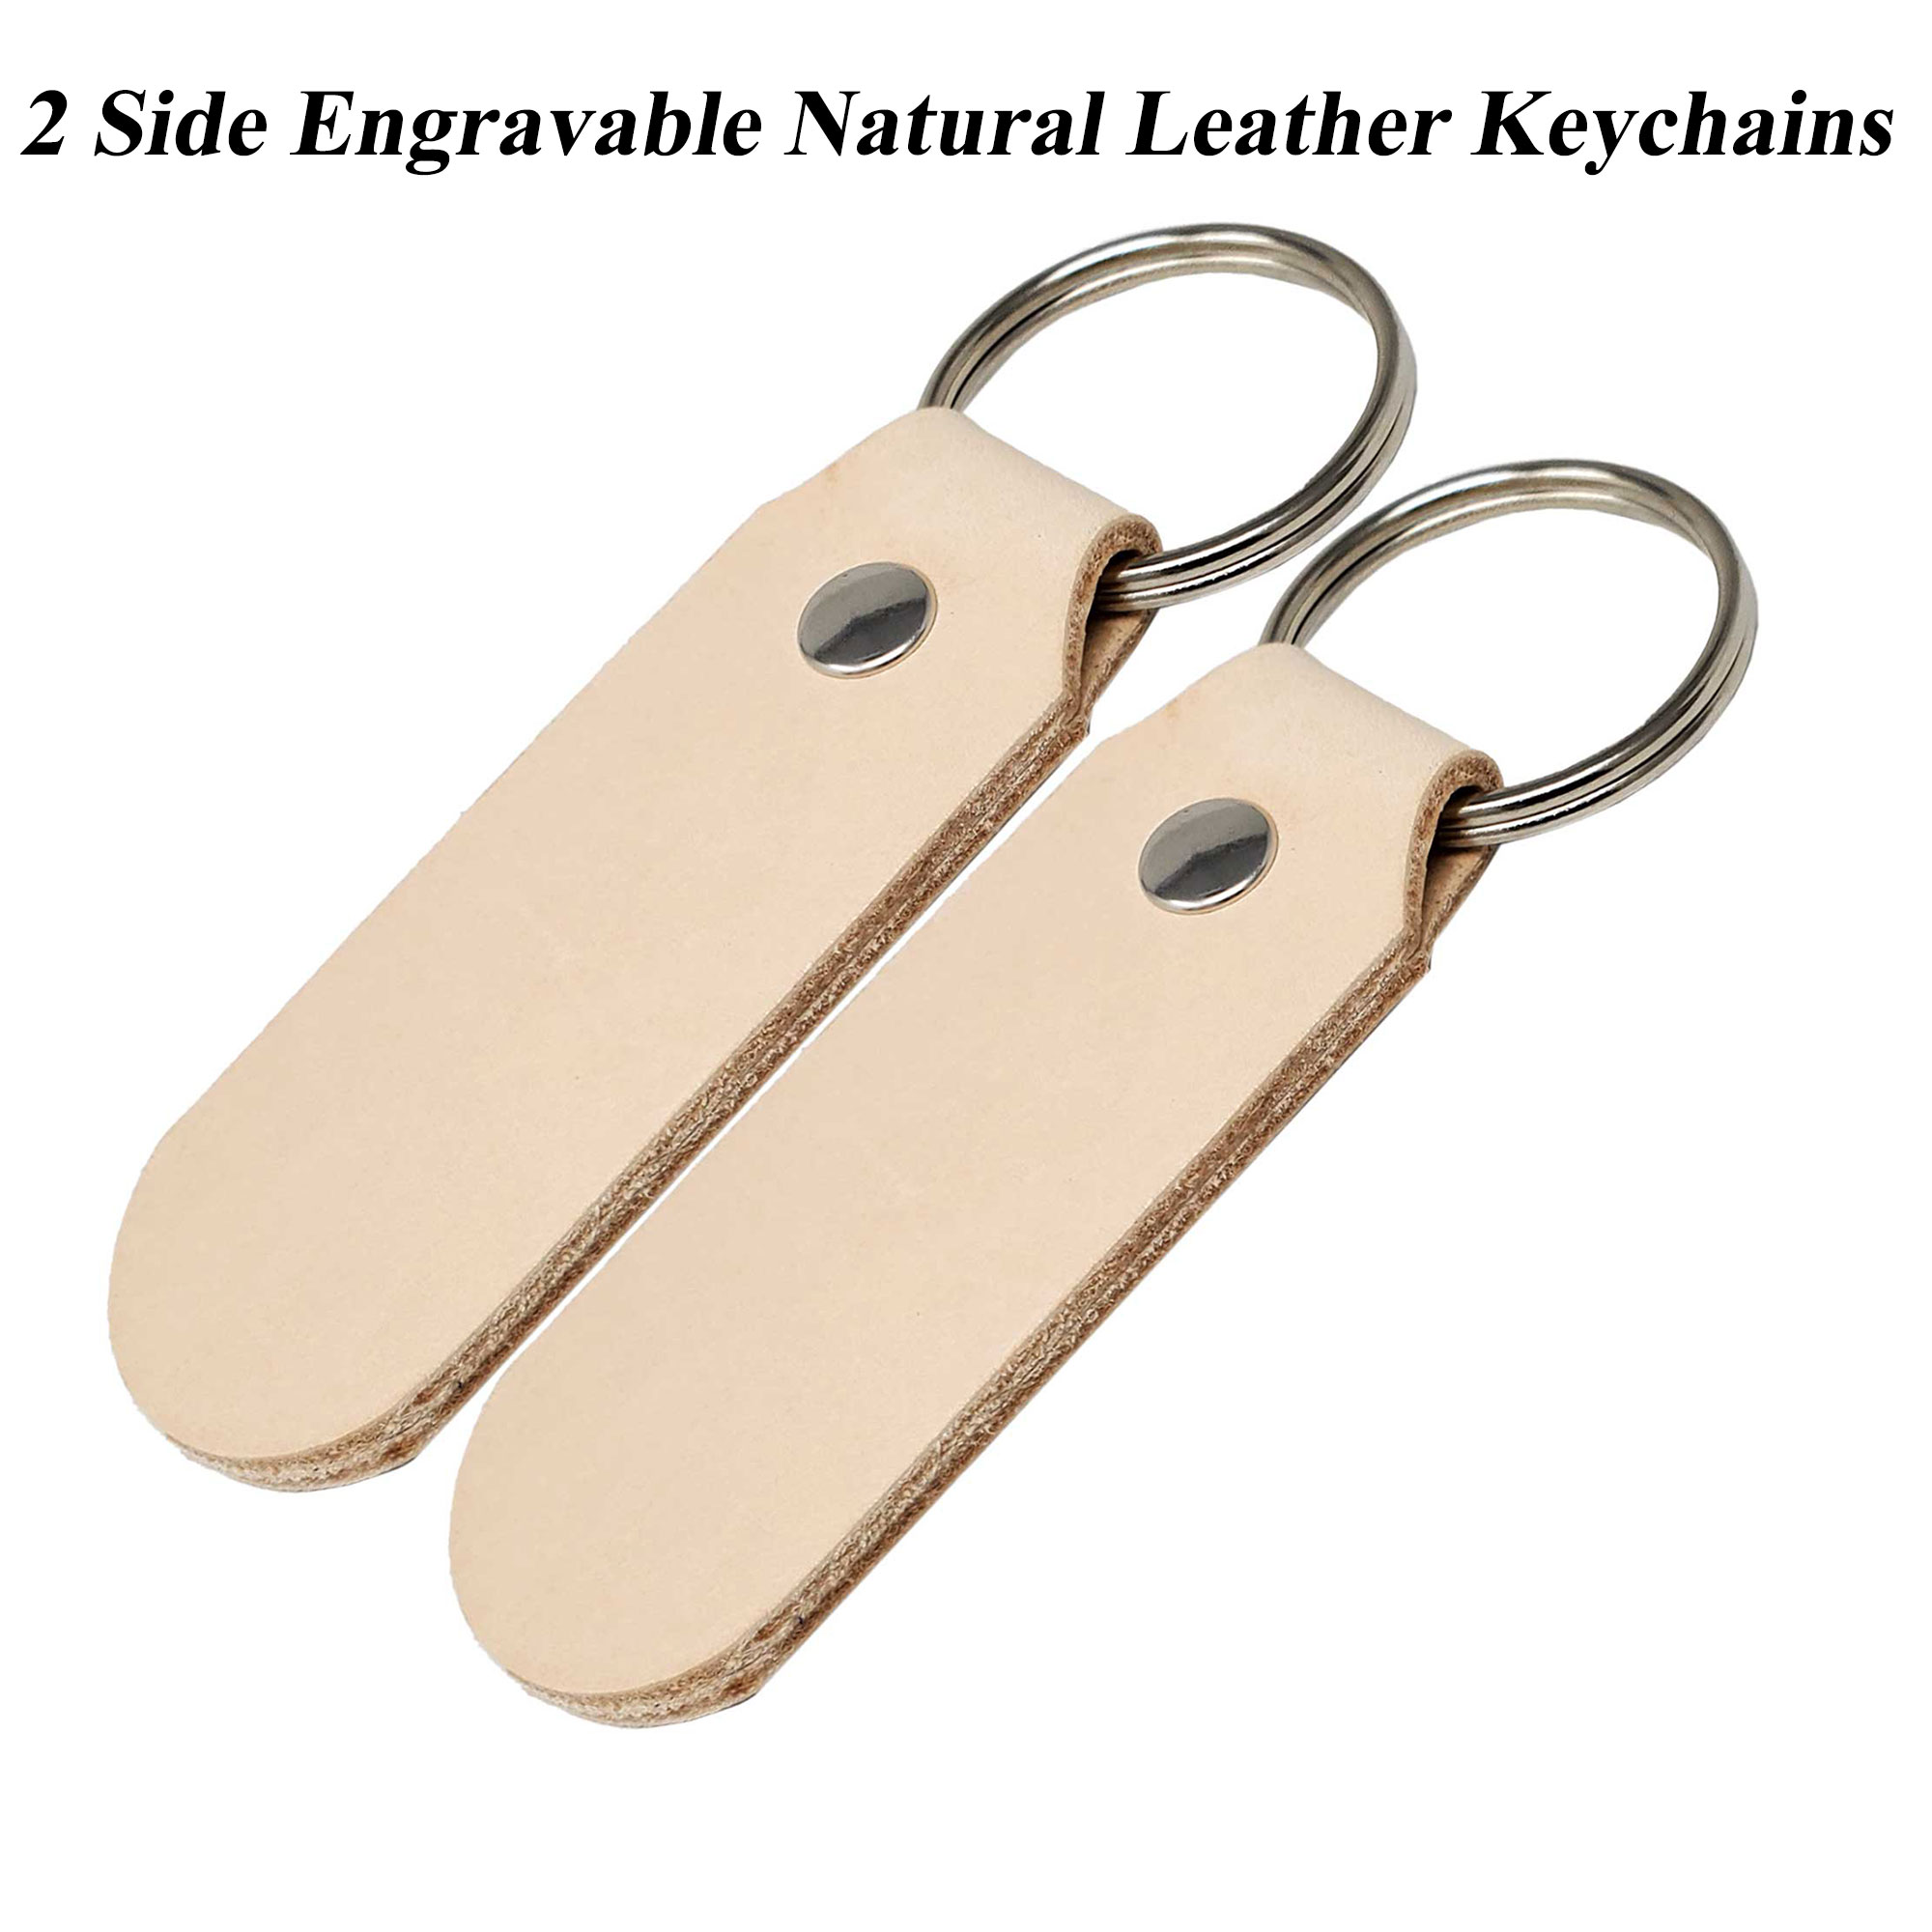 2 sided leather leather keychain